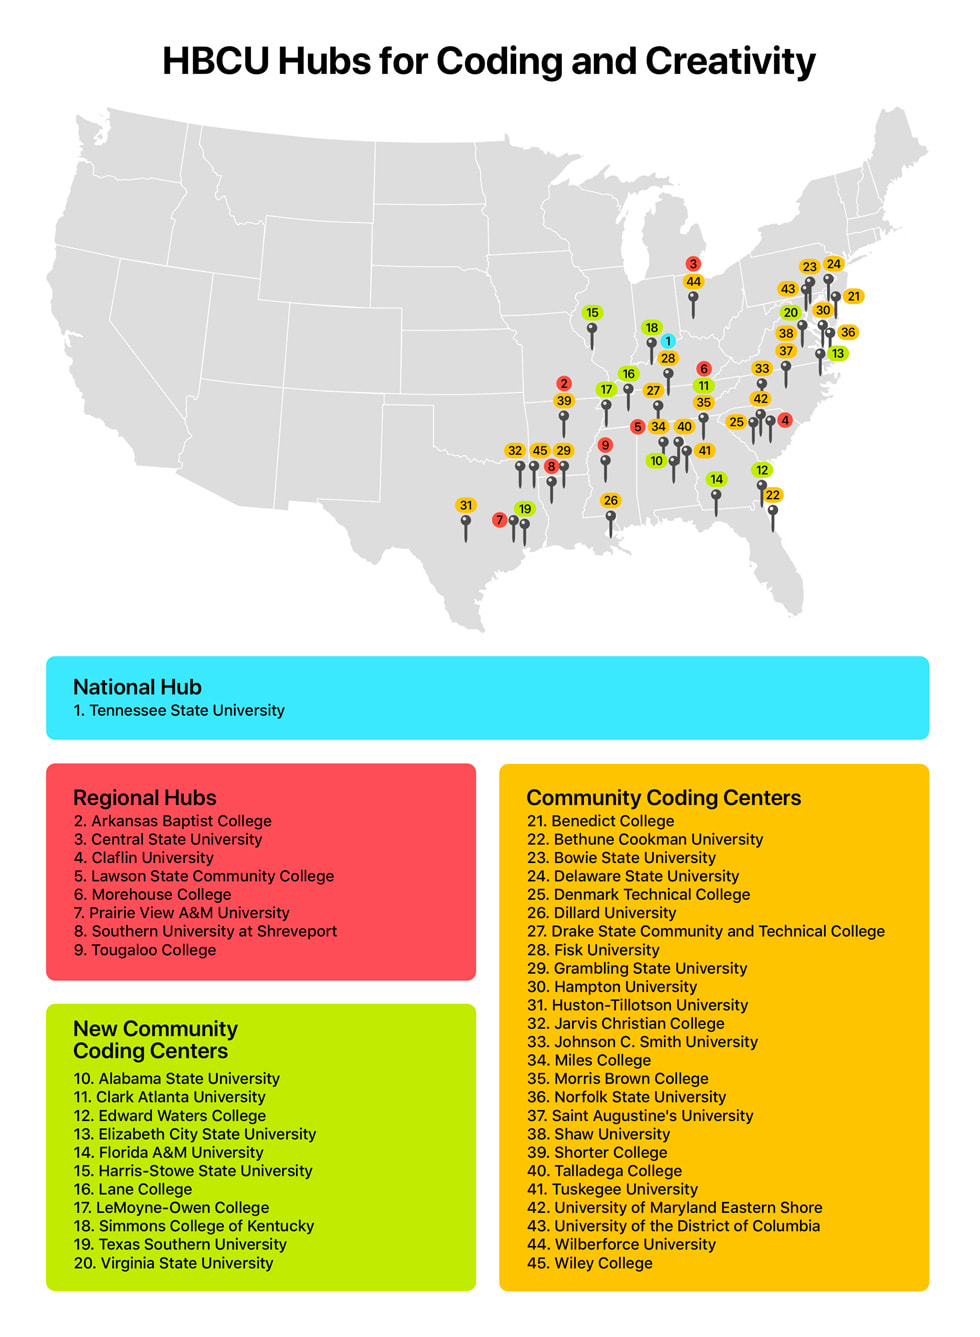 An infographic of the United States showing the locations of the HBCU hubs for coding and creativity.